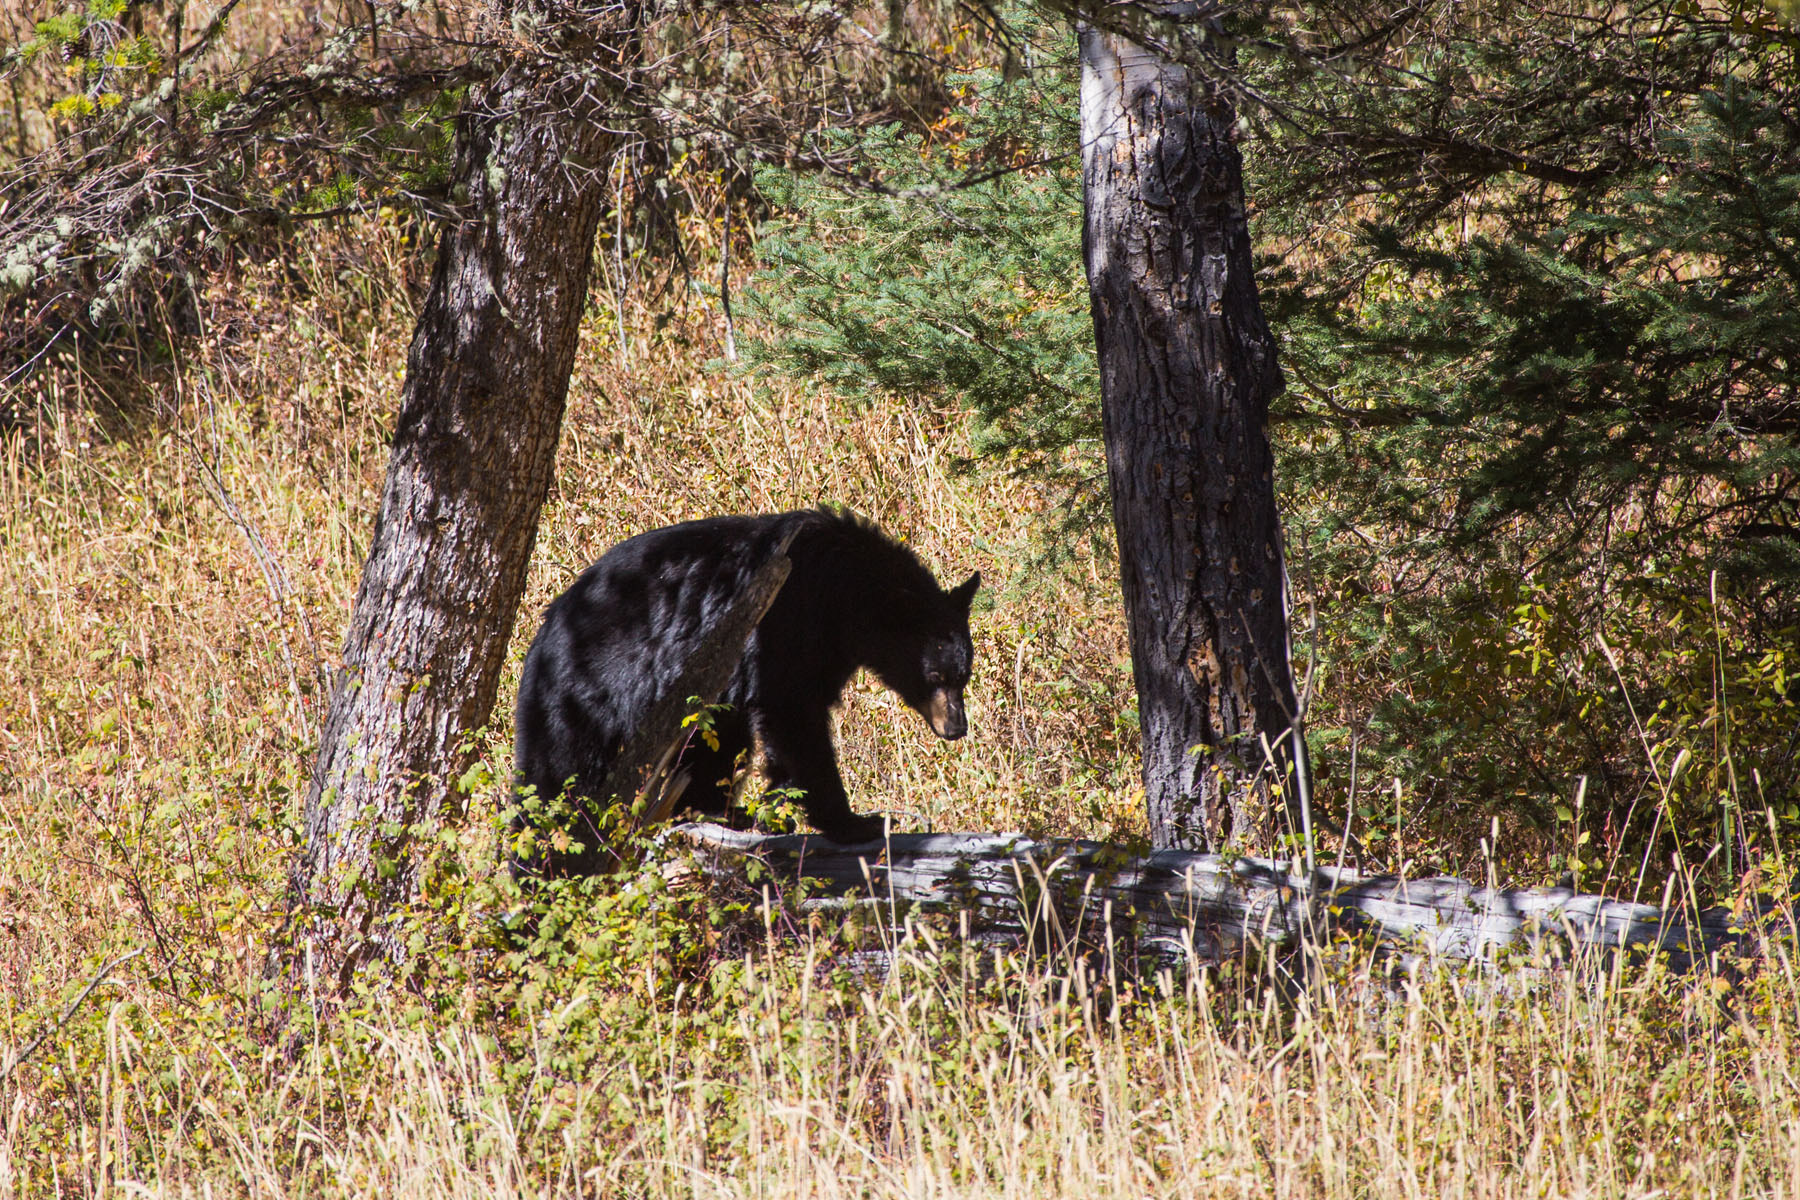 Black bear in Lamar Valley, Yellowstone National Park.  Click for next photo.